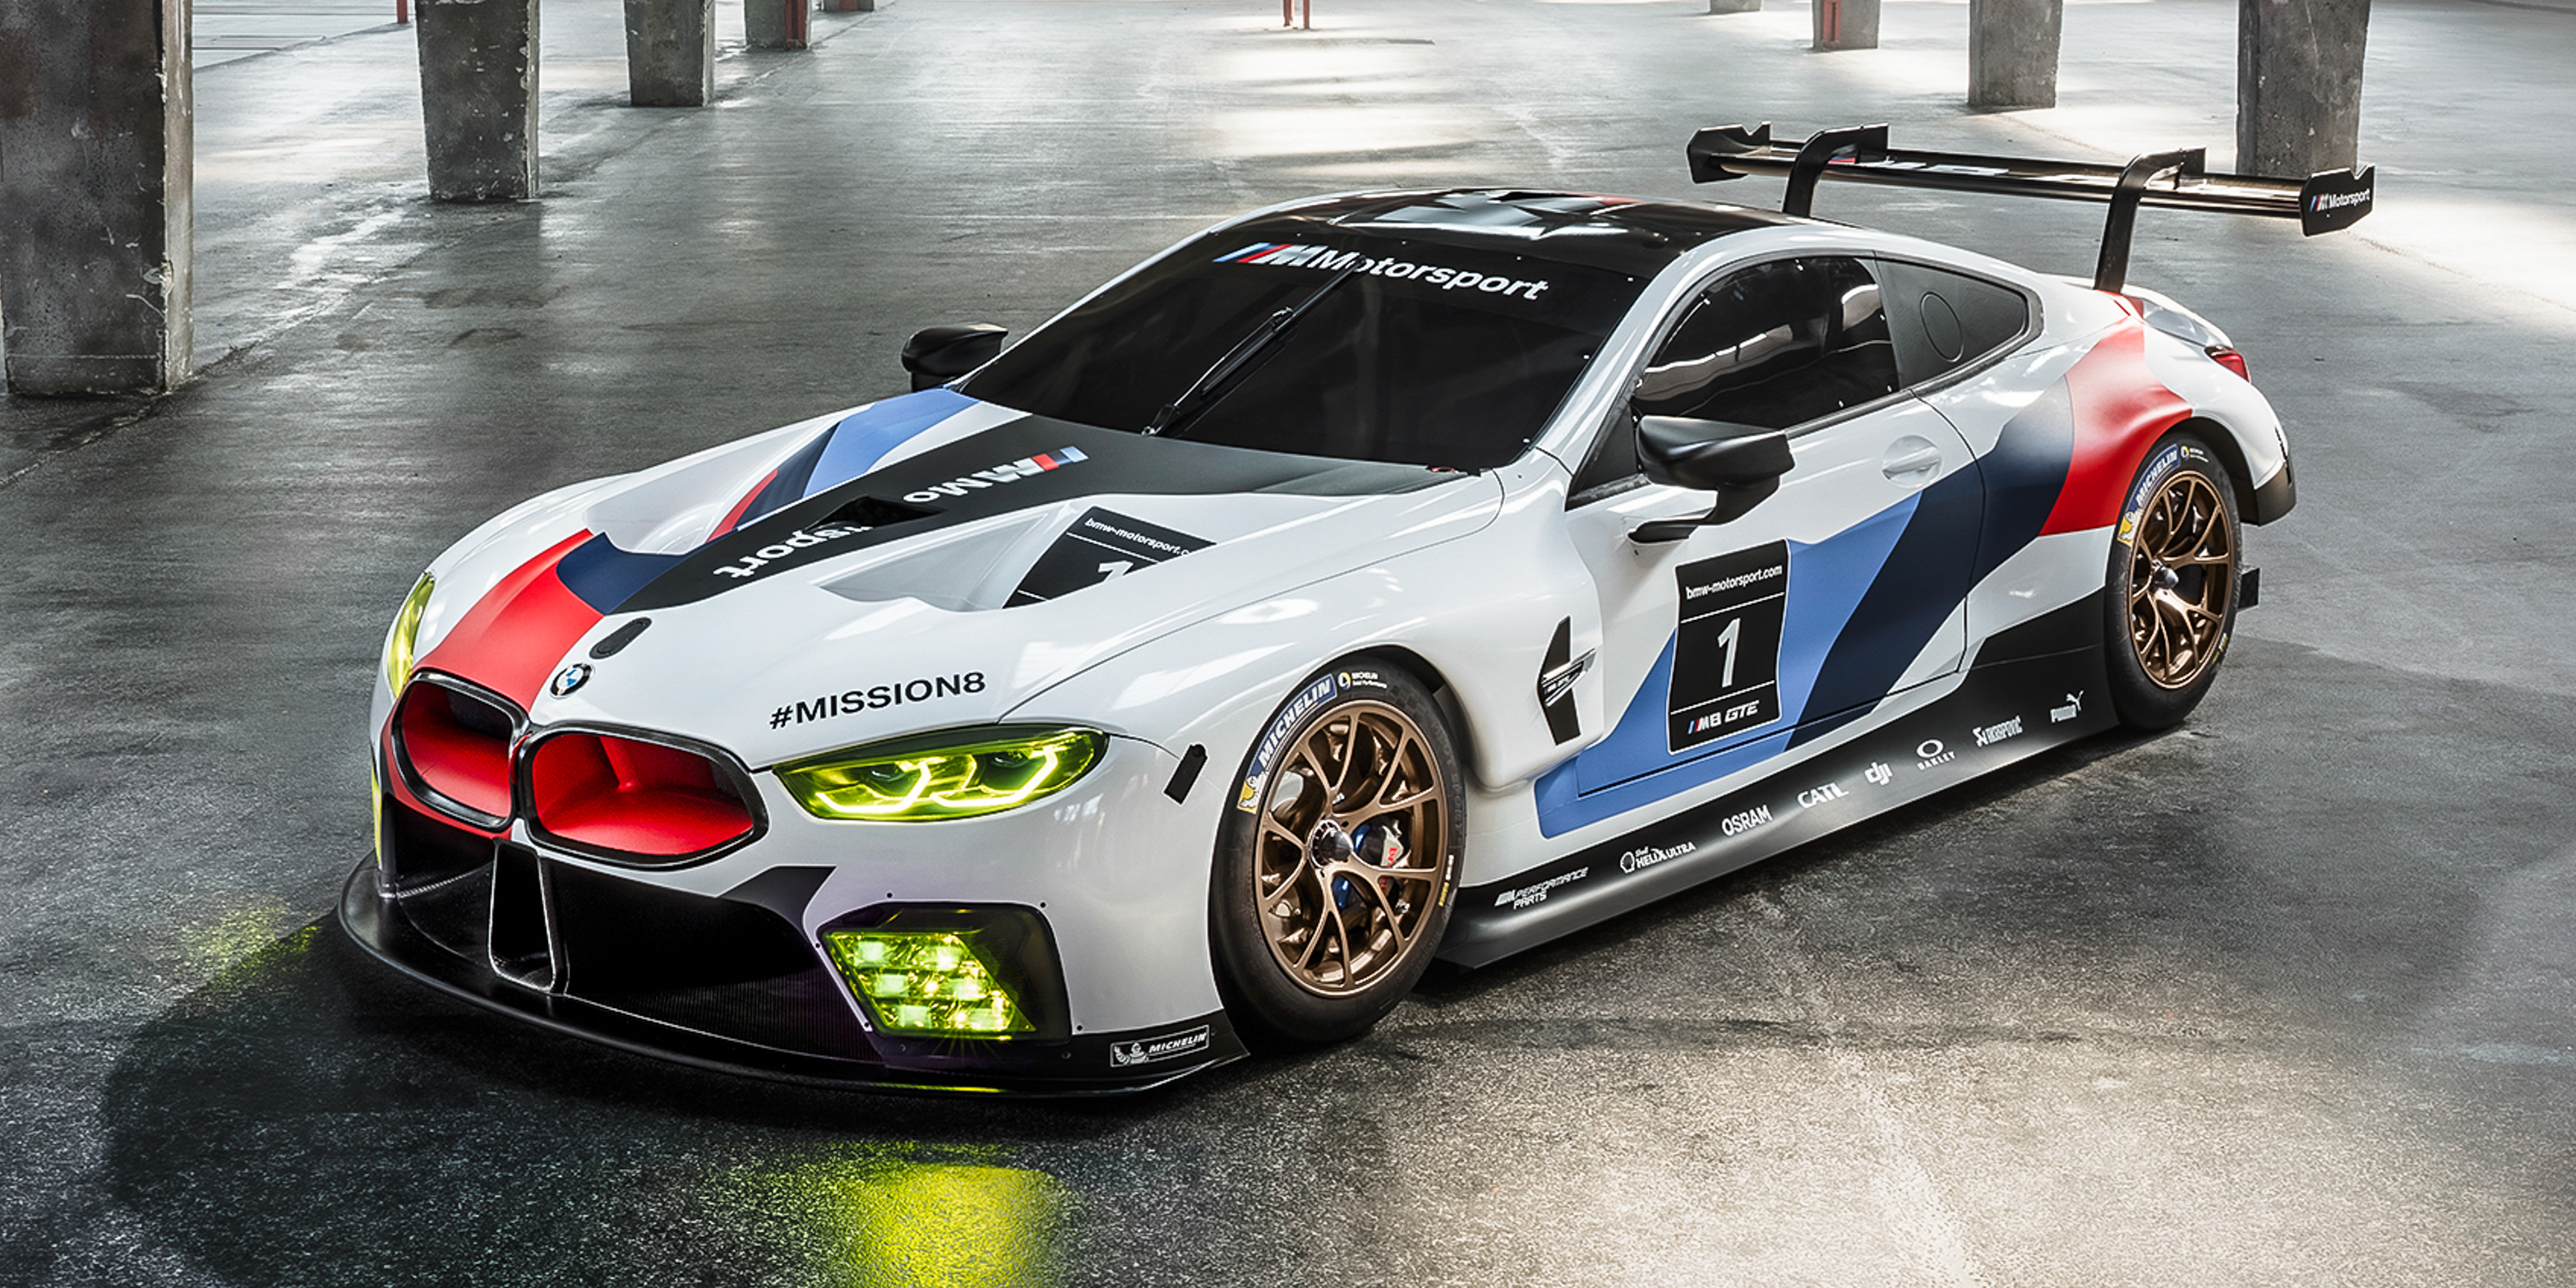 BMW set for 2018 Le Mans return with spunky-looking BMW M8 GTE - photos ...